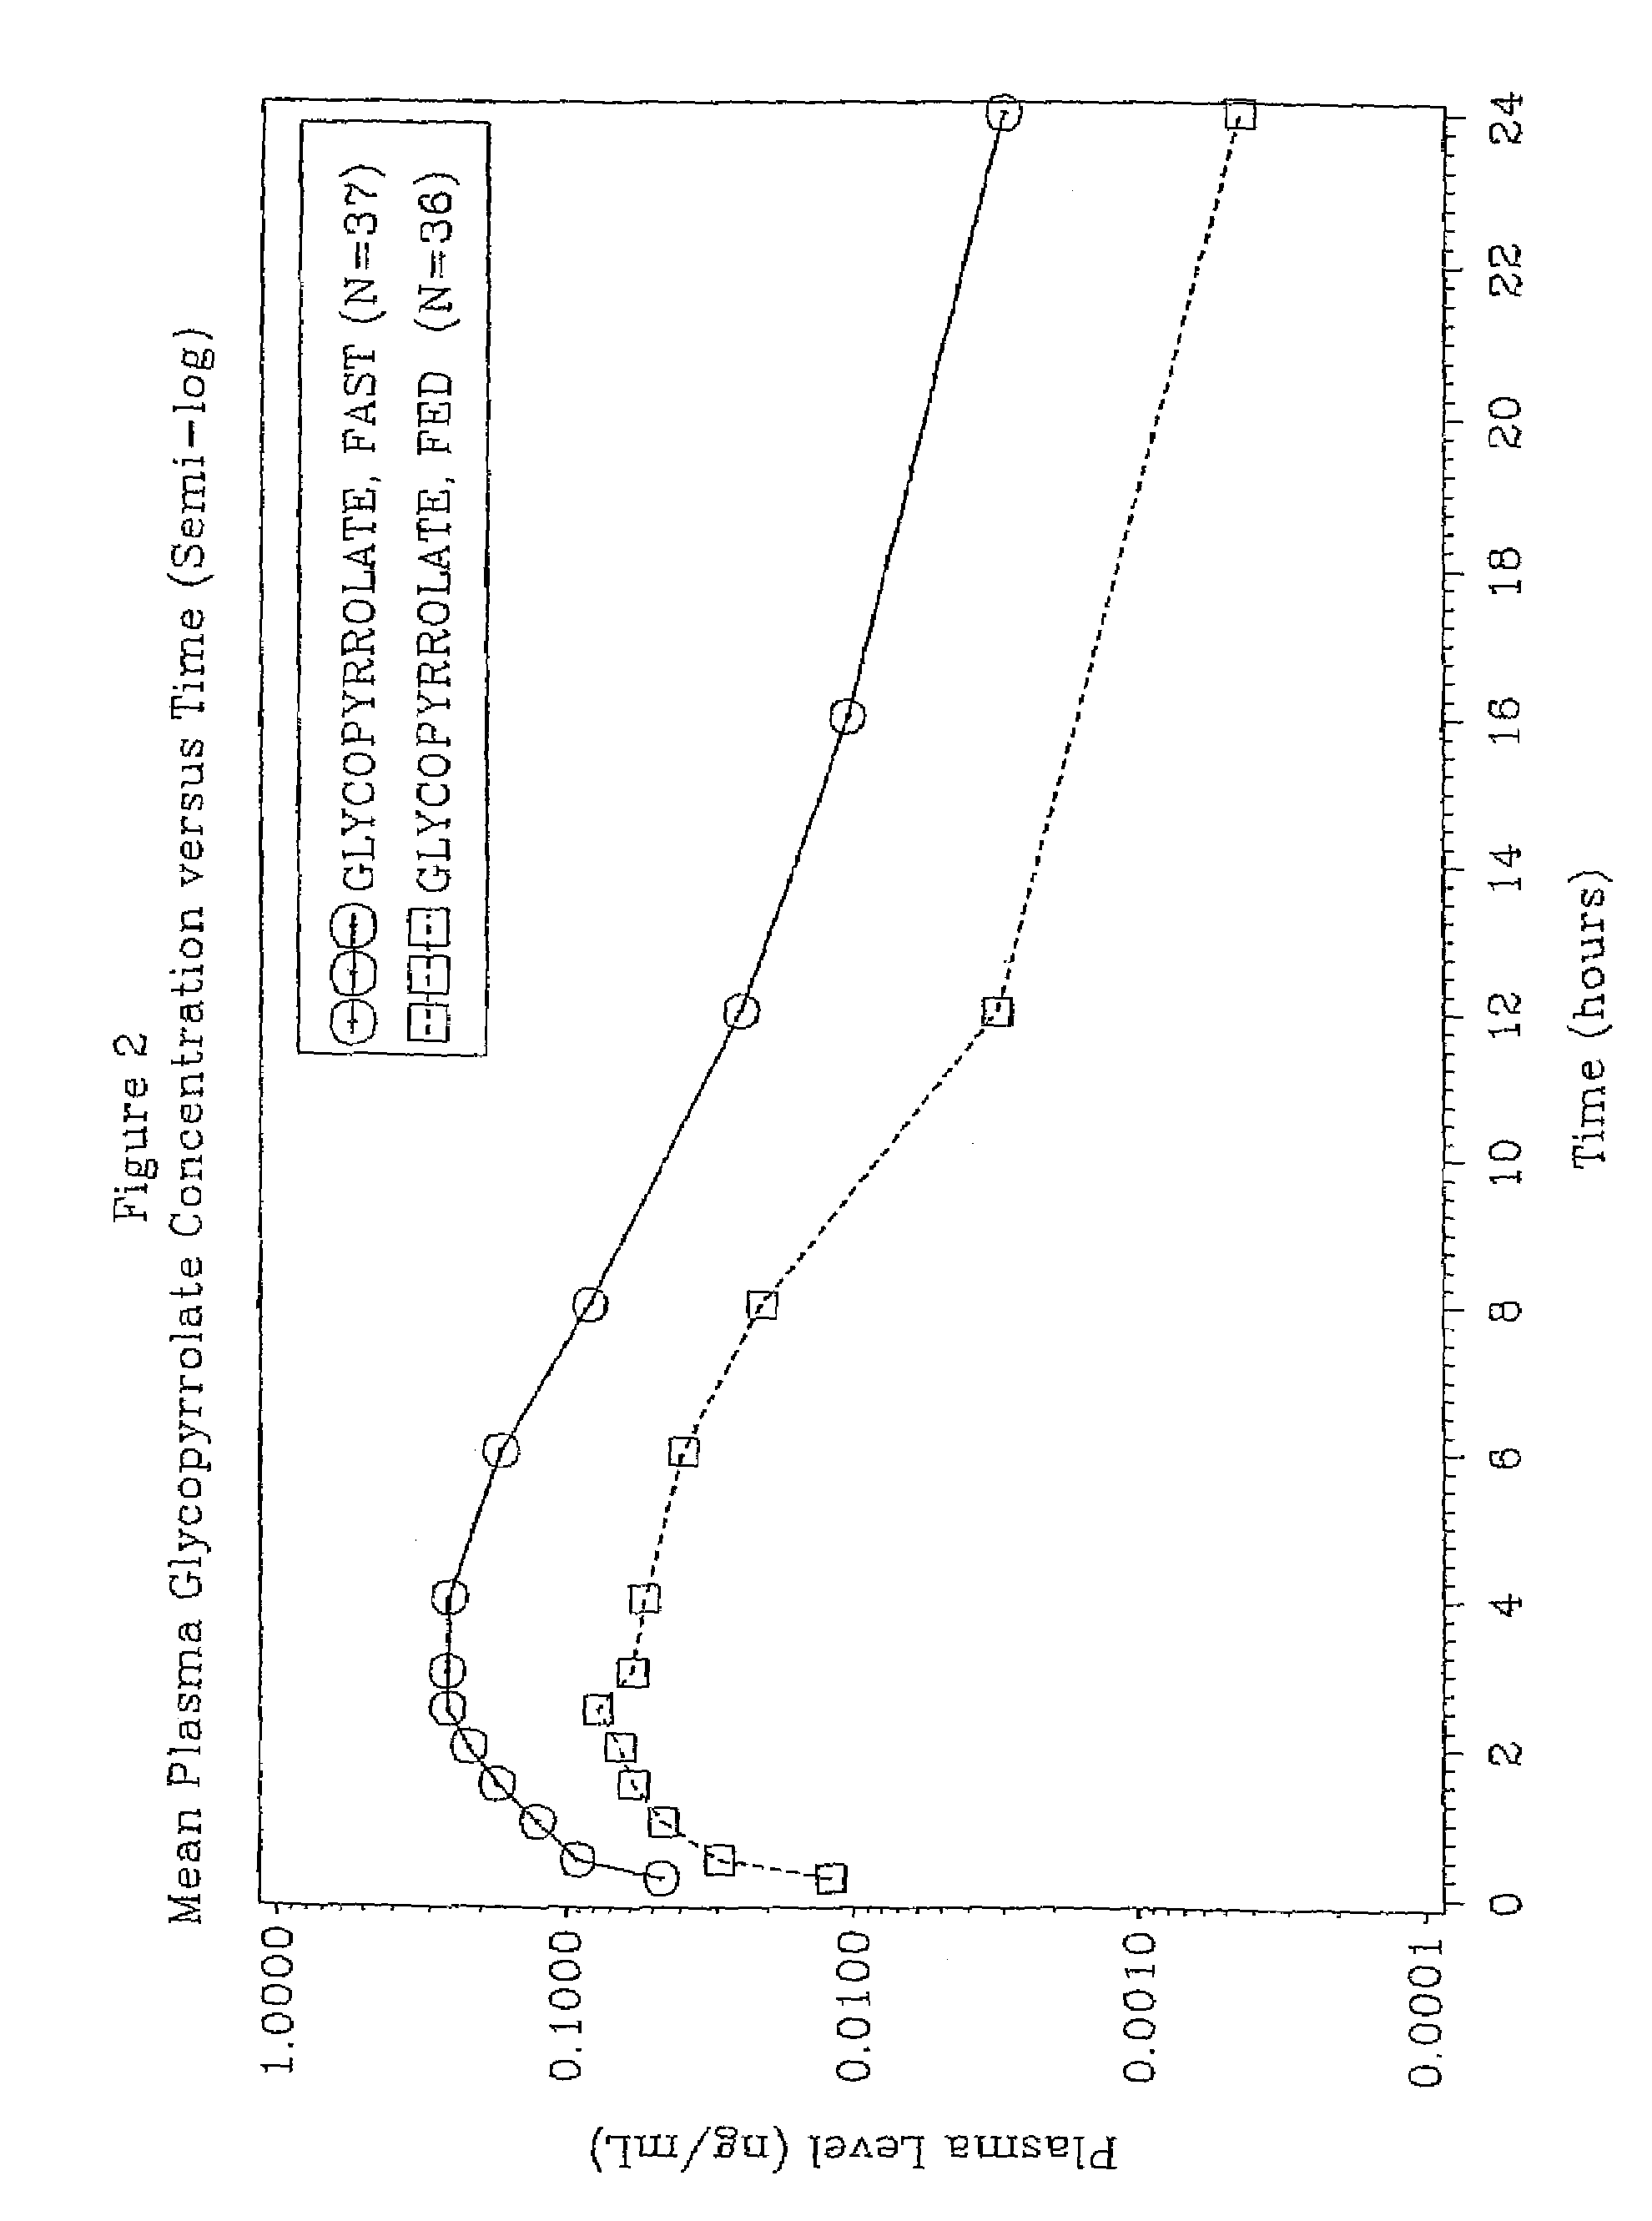 Method for increasing the bioavailability of glycopyrrolate